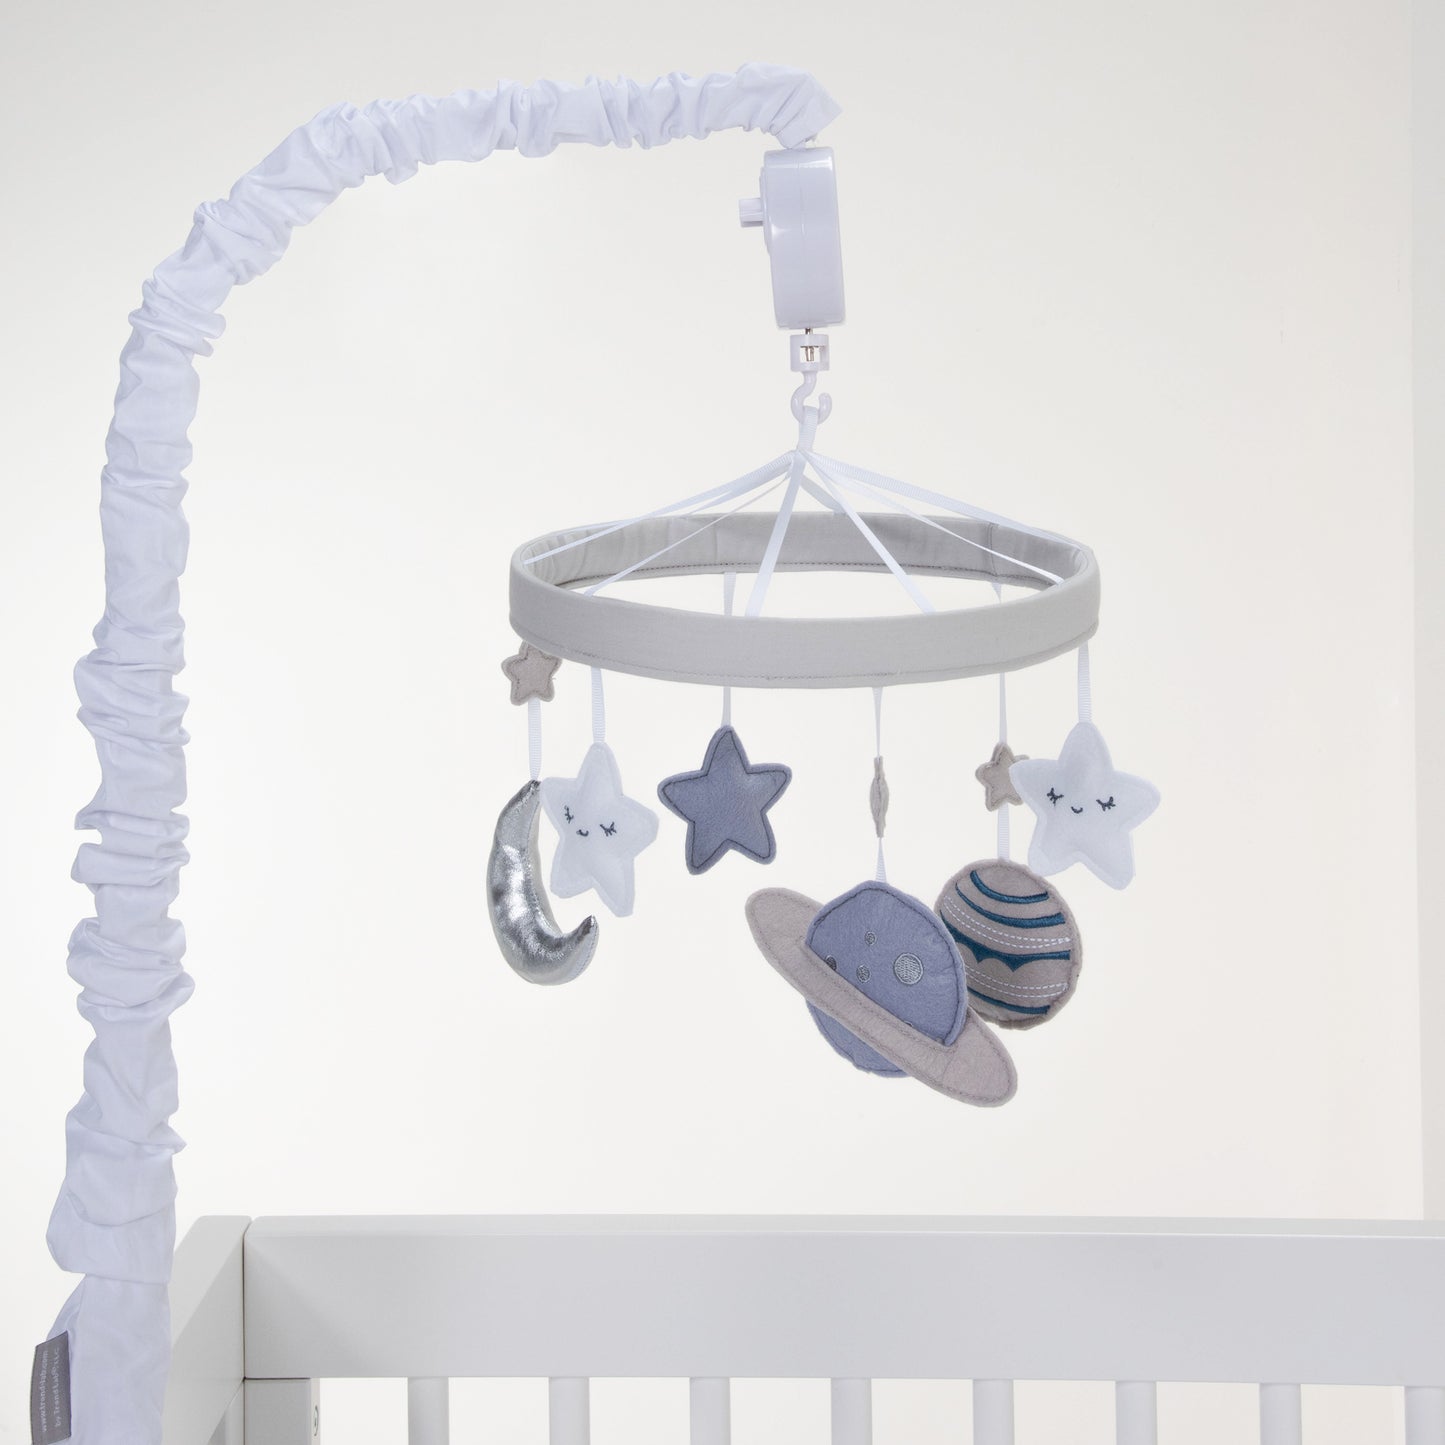 Celestial Space Musical Mobile - in room stylized image